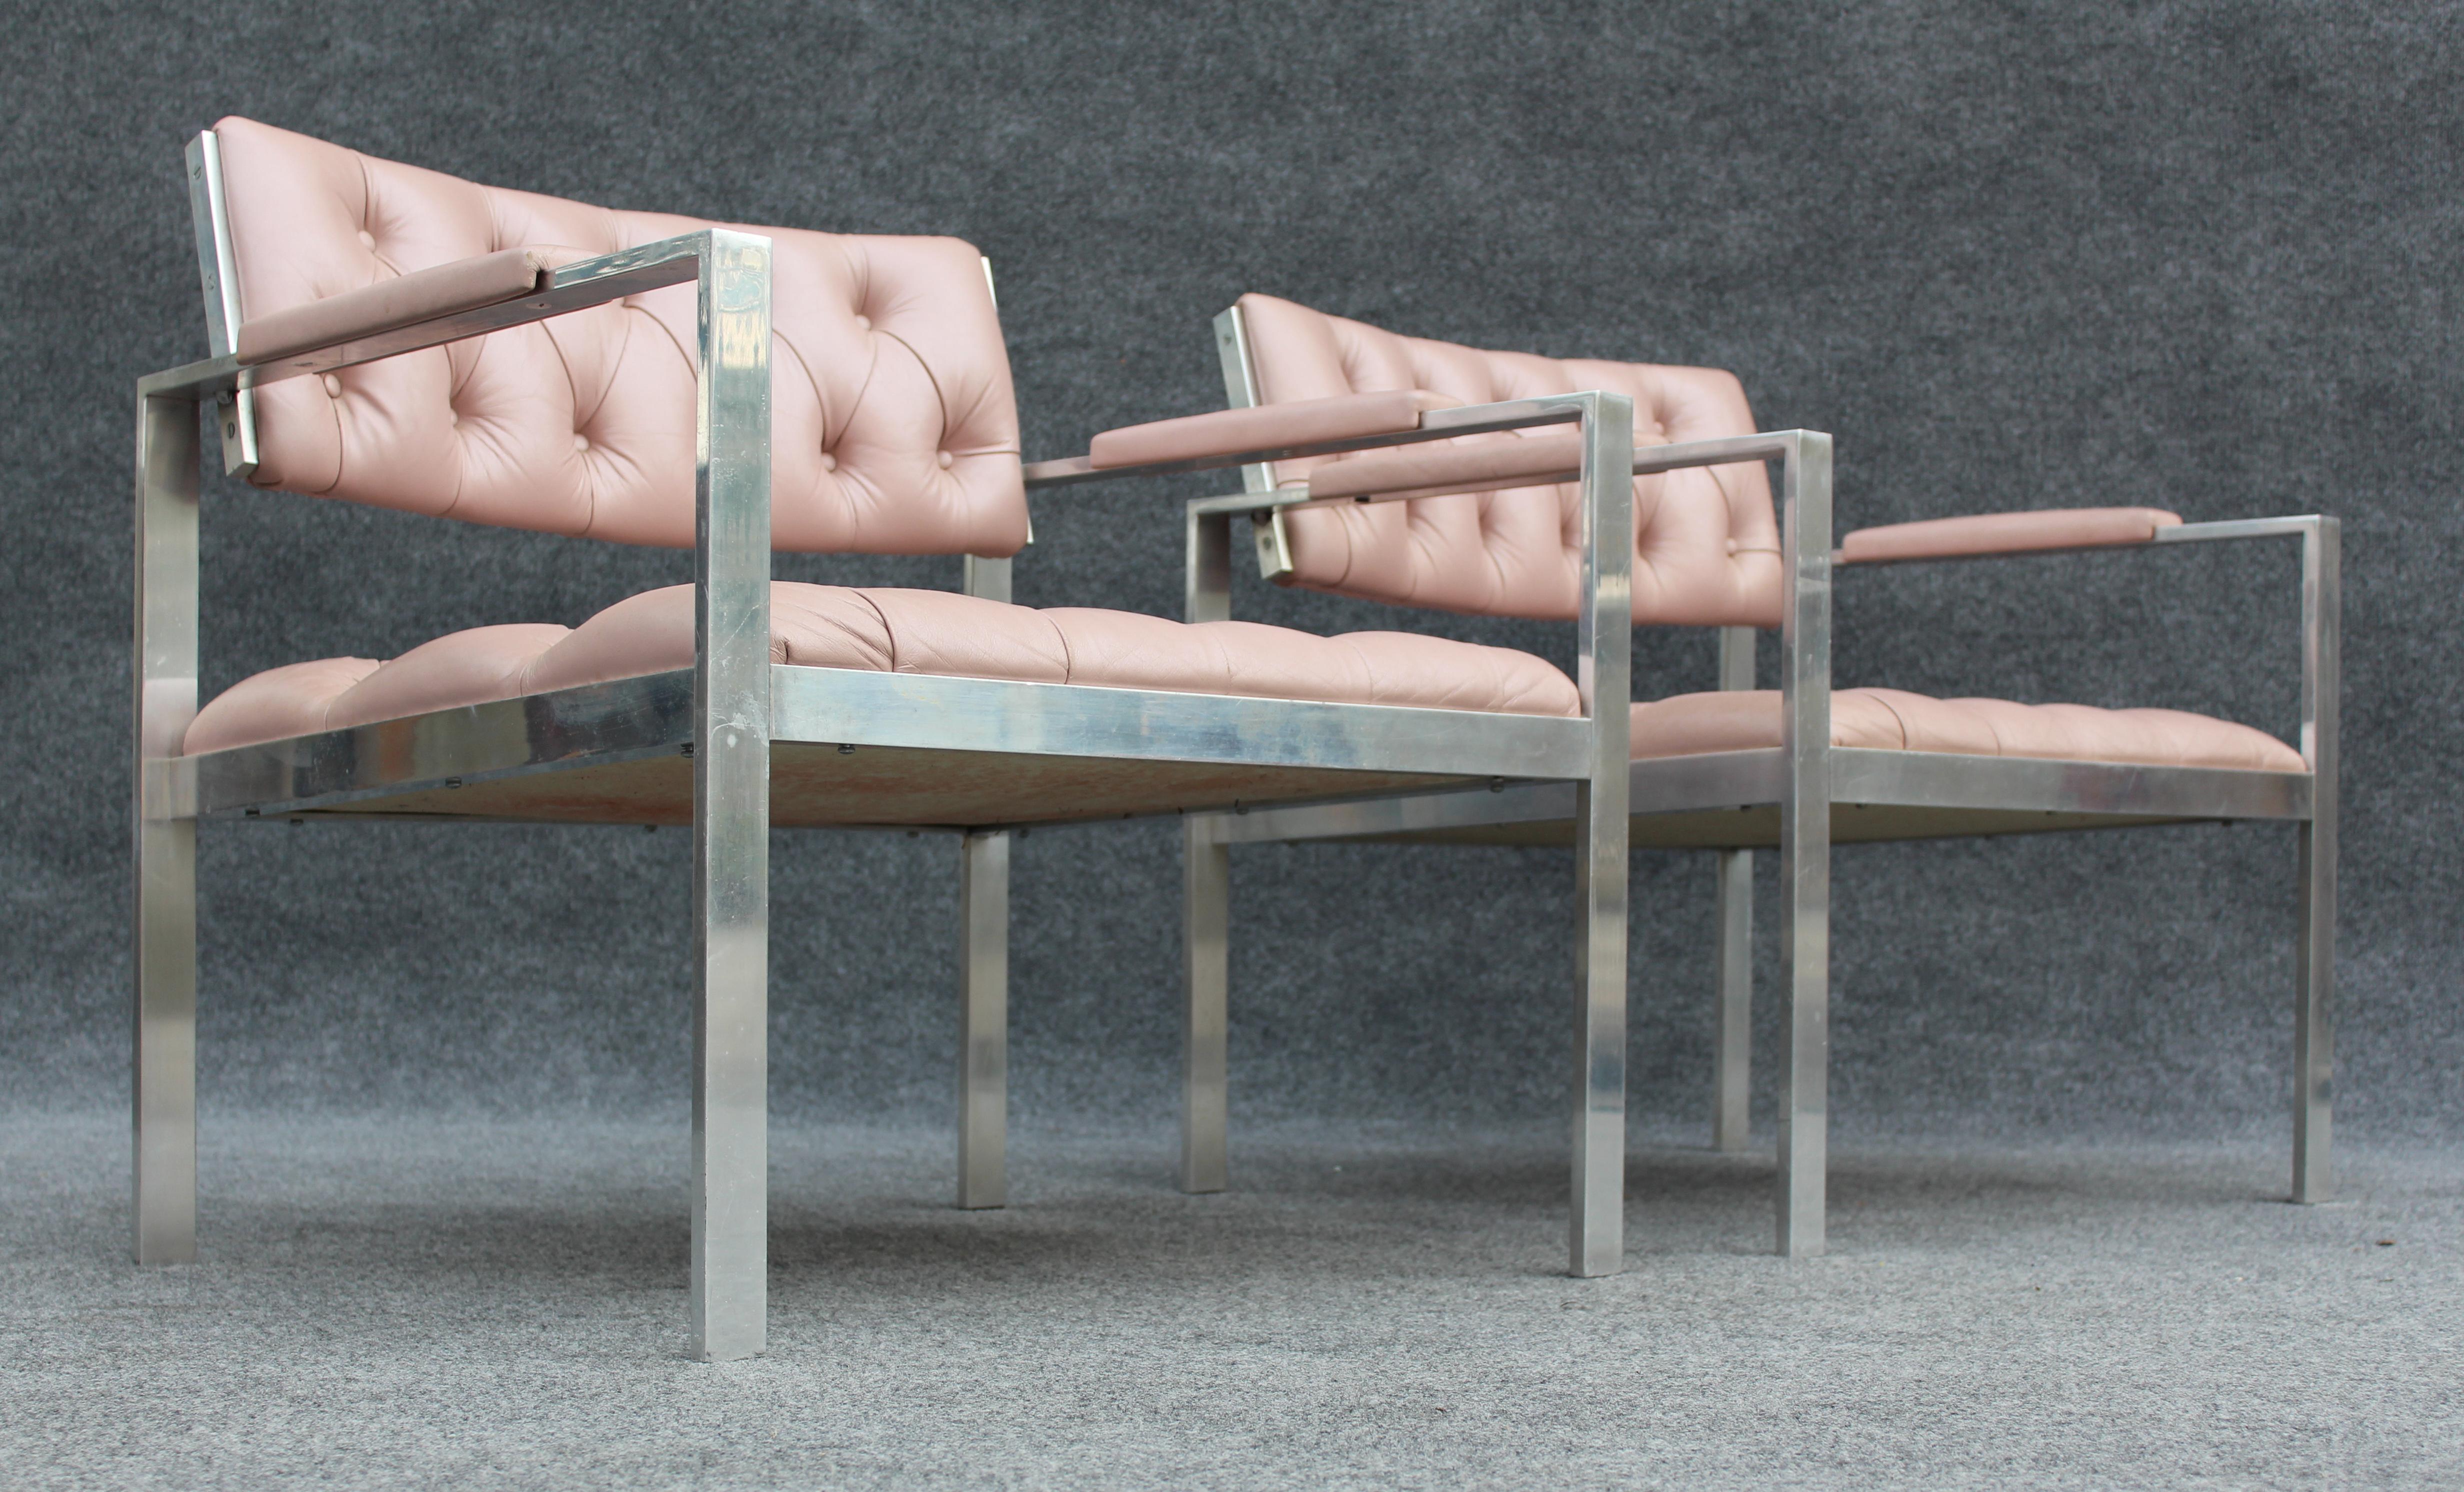 Pair of Rare Harvey Probber Polished Aluminum & Pink Leather Lounge Chairs 1970s For Sale 11